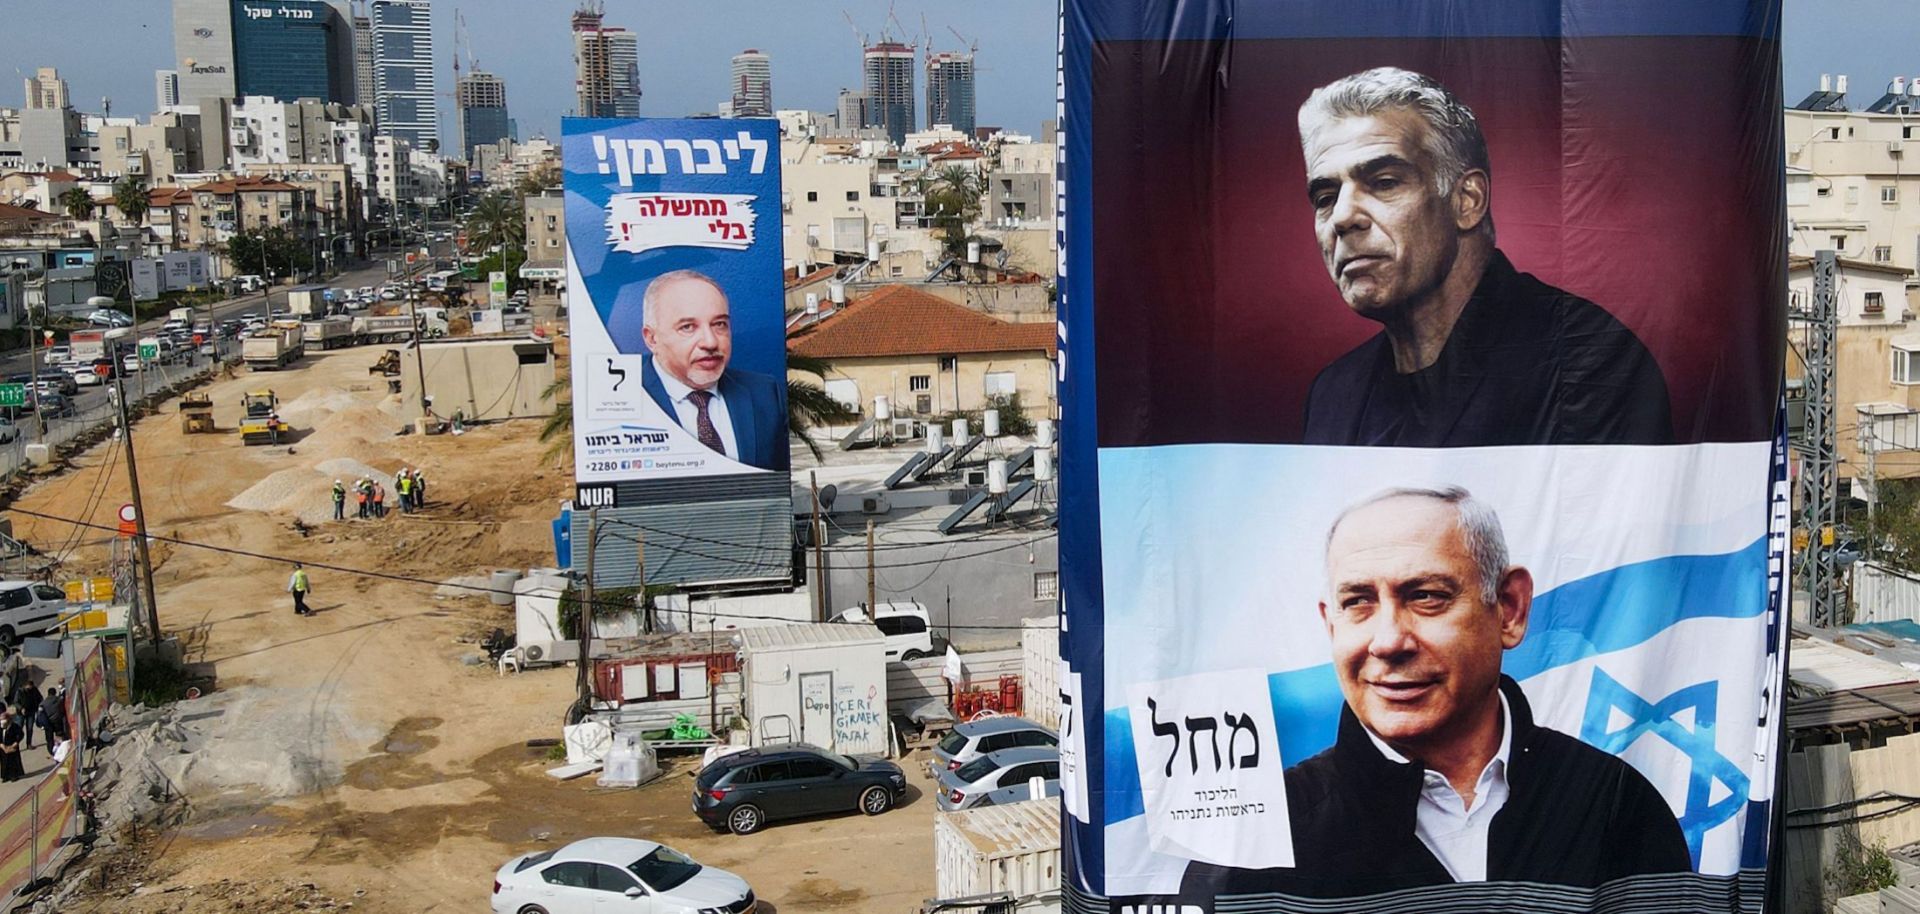 Campaign posters hang over a construction site in Bnei Brak, Israel, on March 14, 2021.